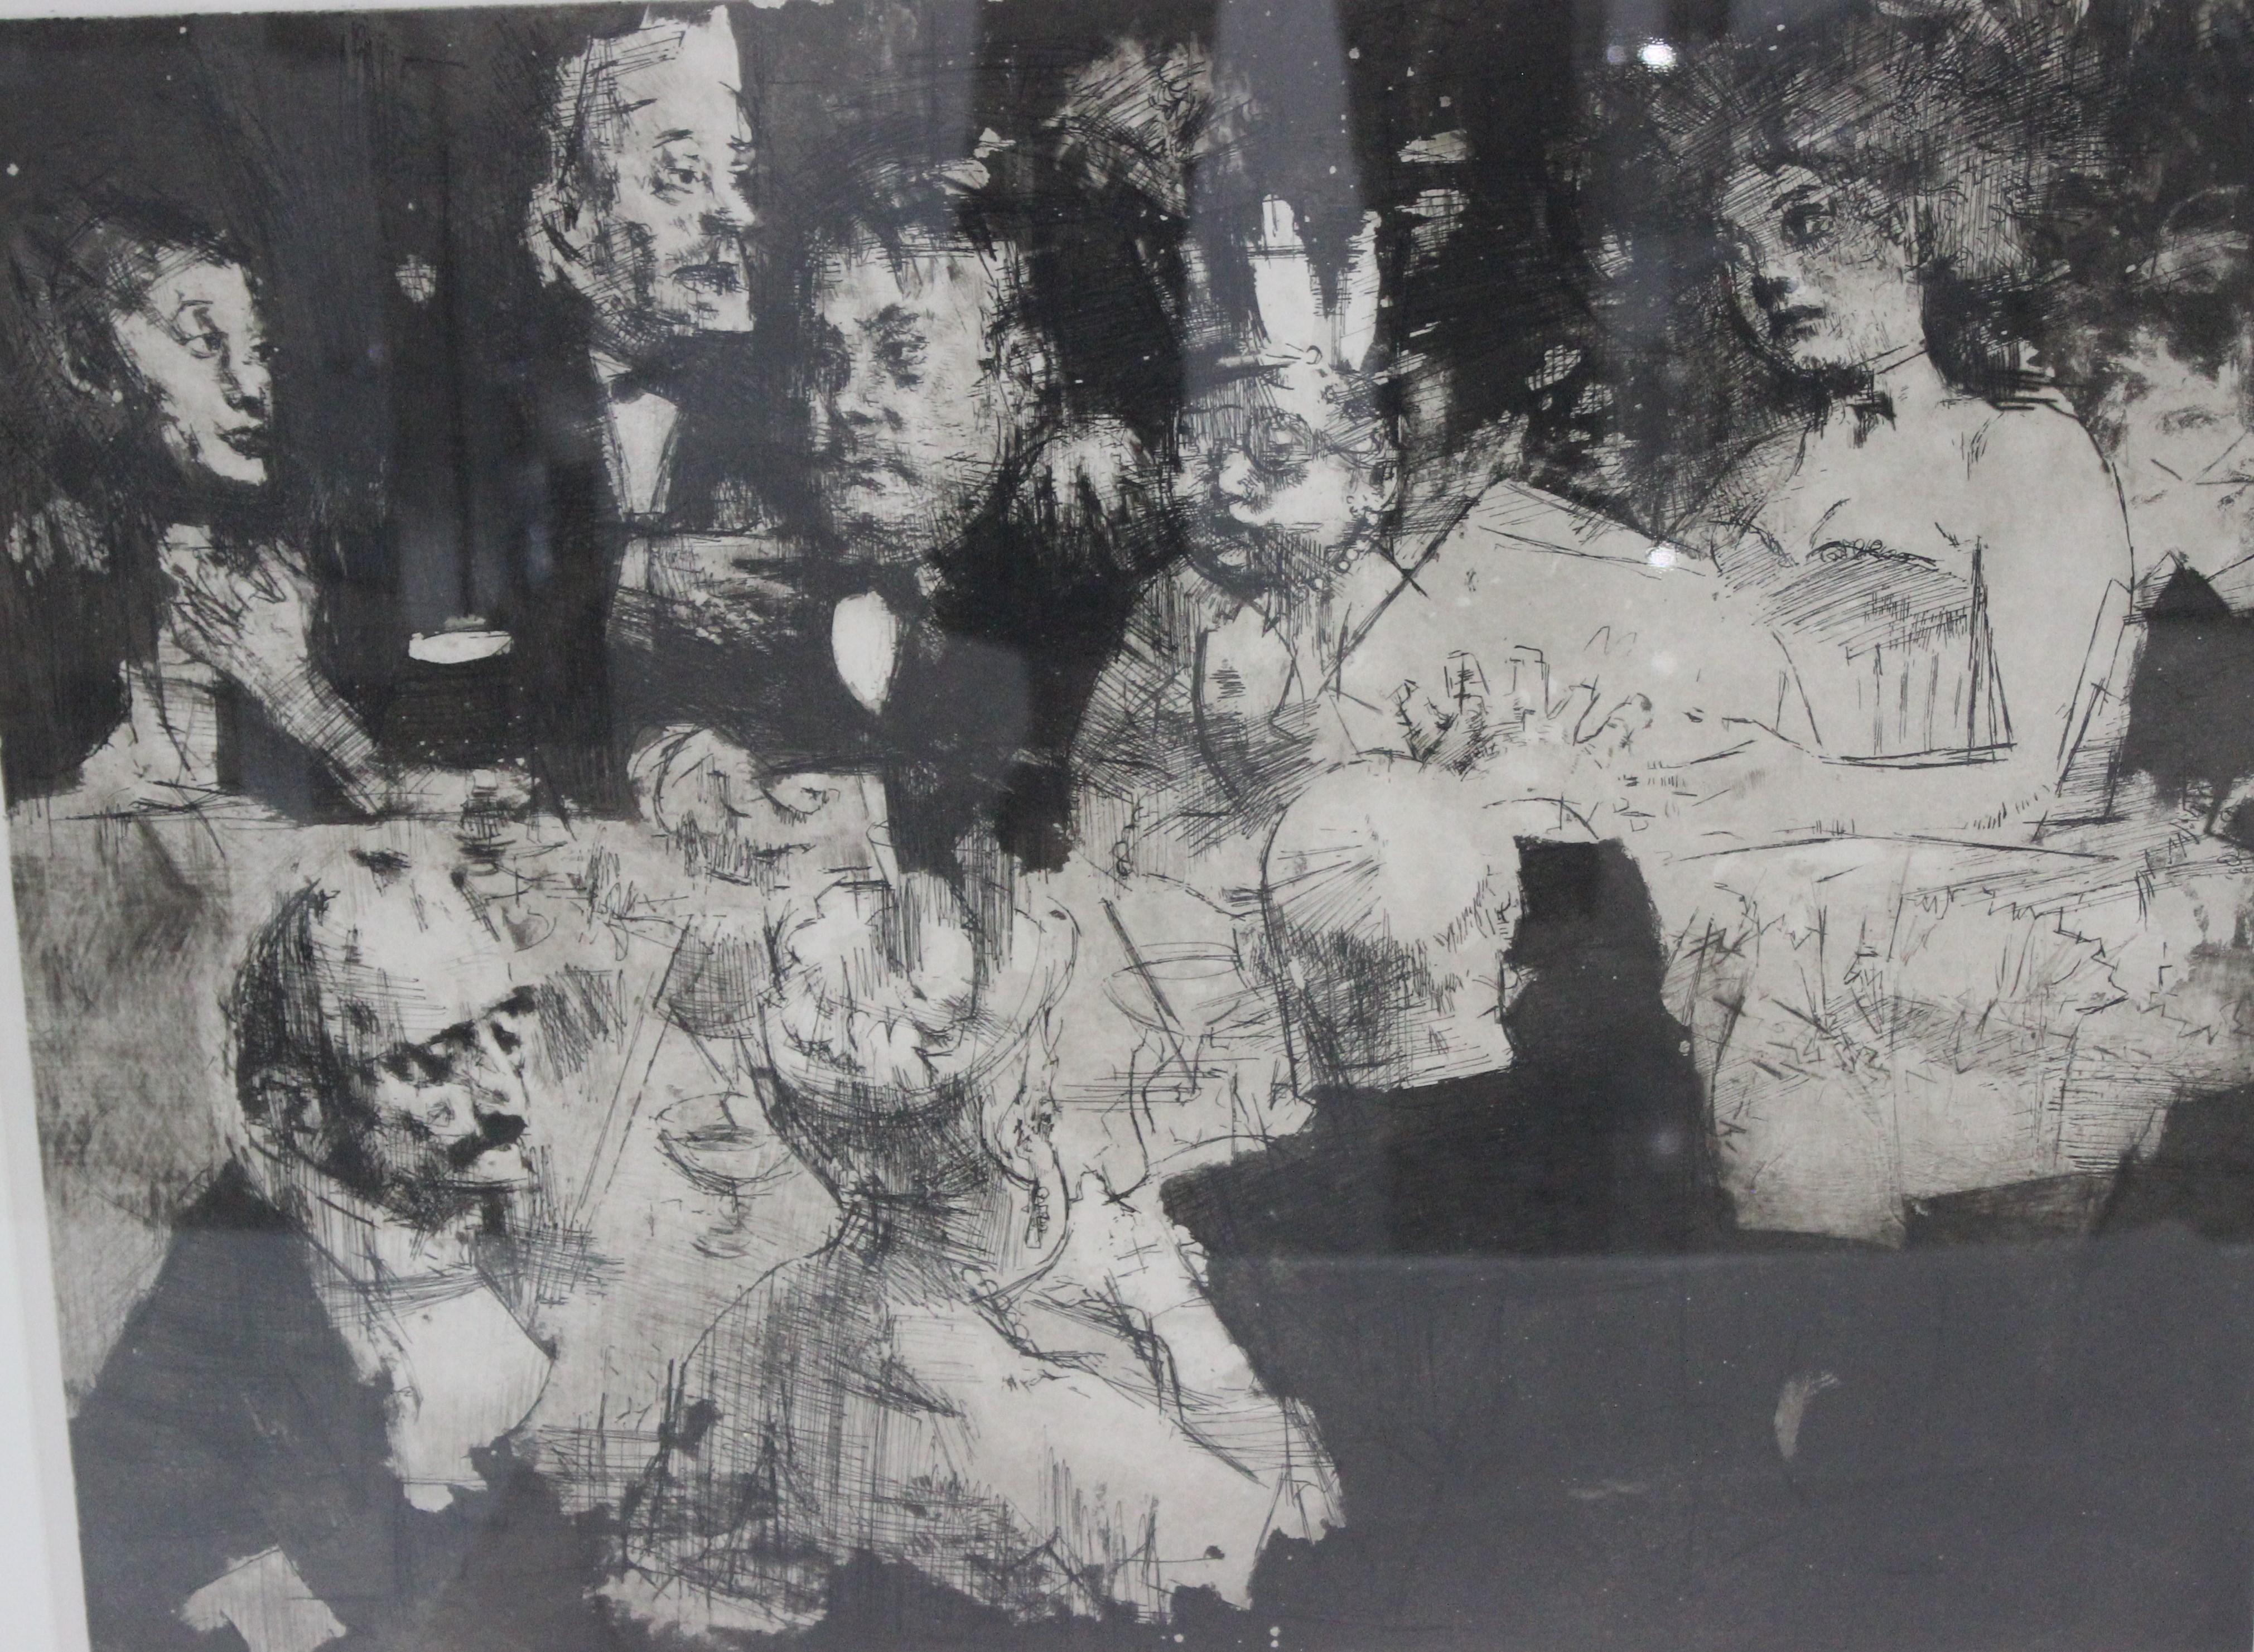 This dry point, mezzotint, aquatint etching by Jack Levine is titled 